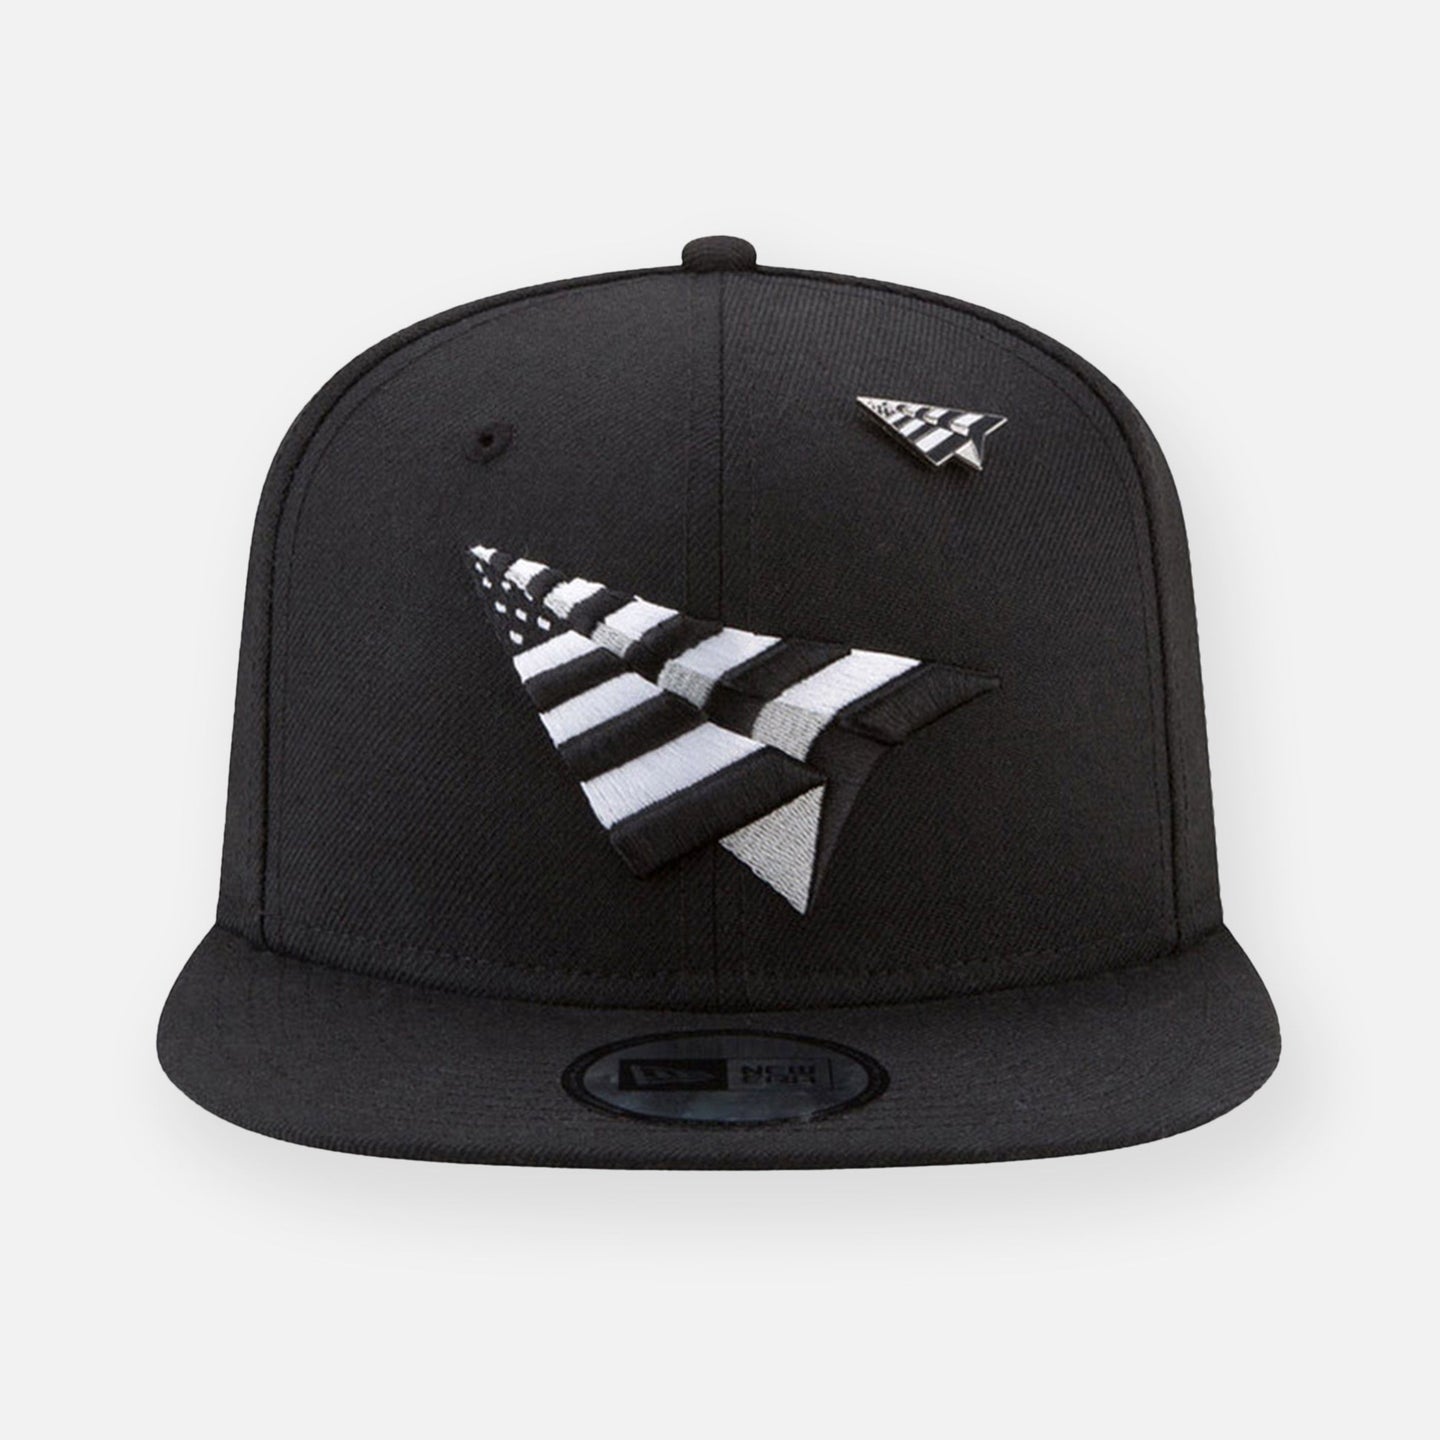 Paper Plane - The Original Crown Old School Snapback Hat with Green Undervisor - Clique Apparel